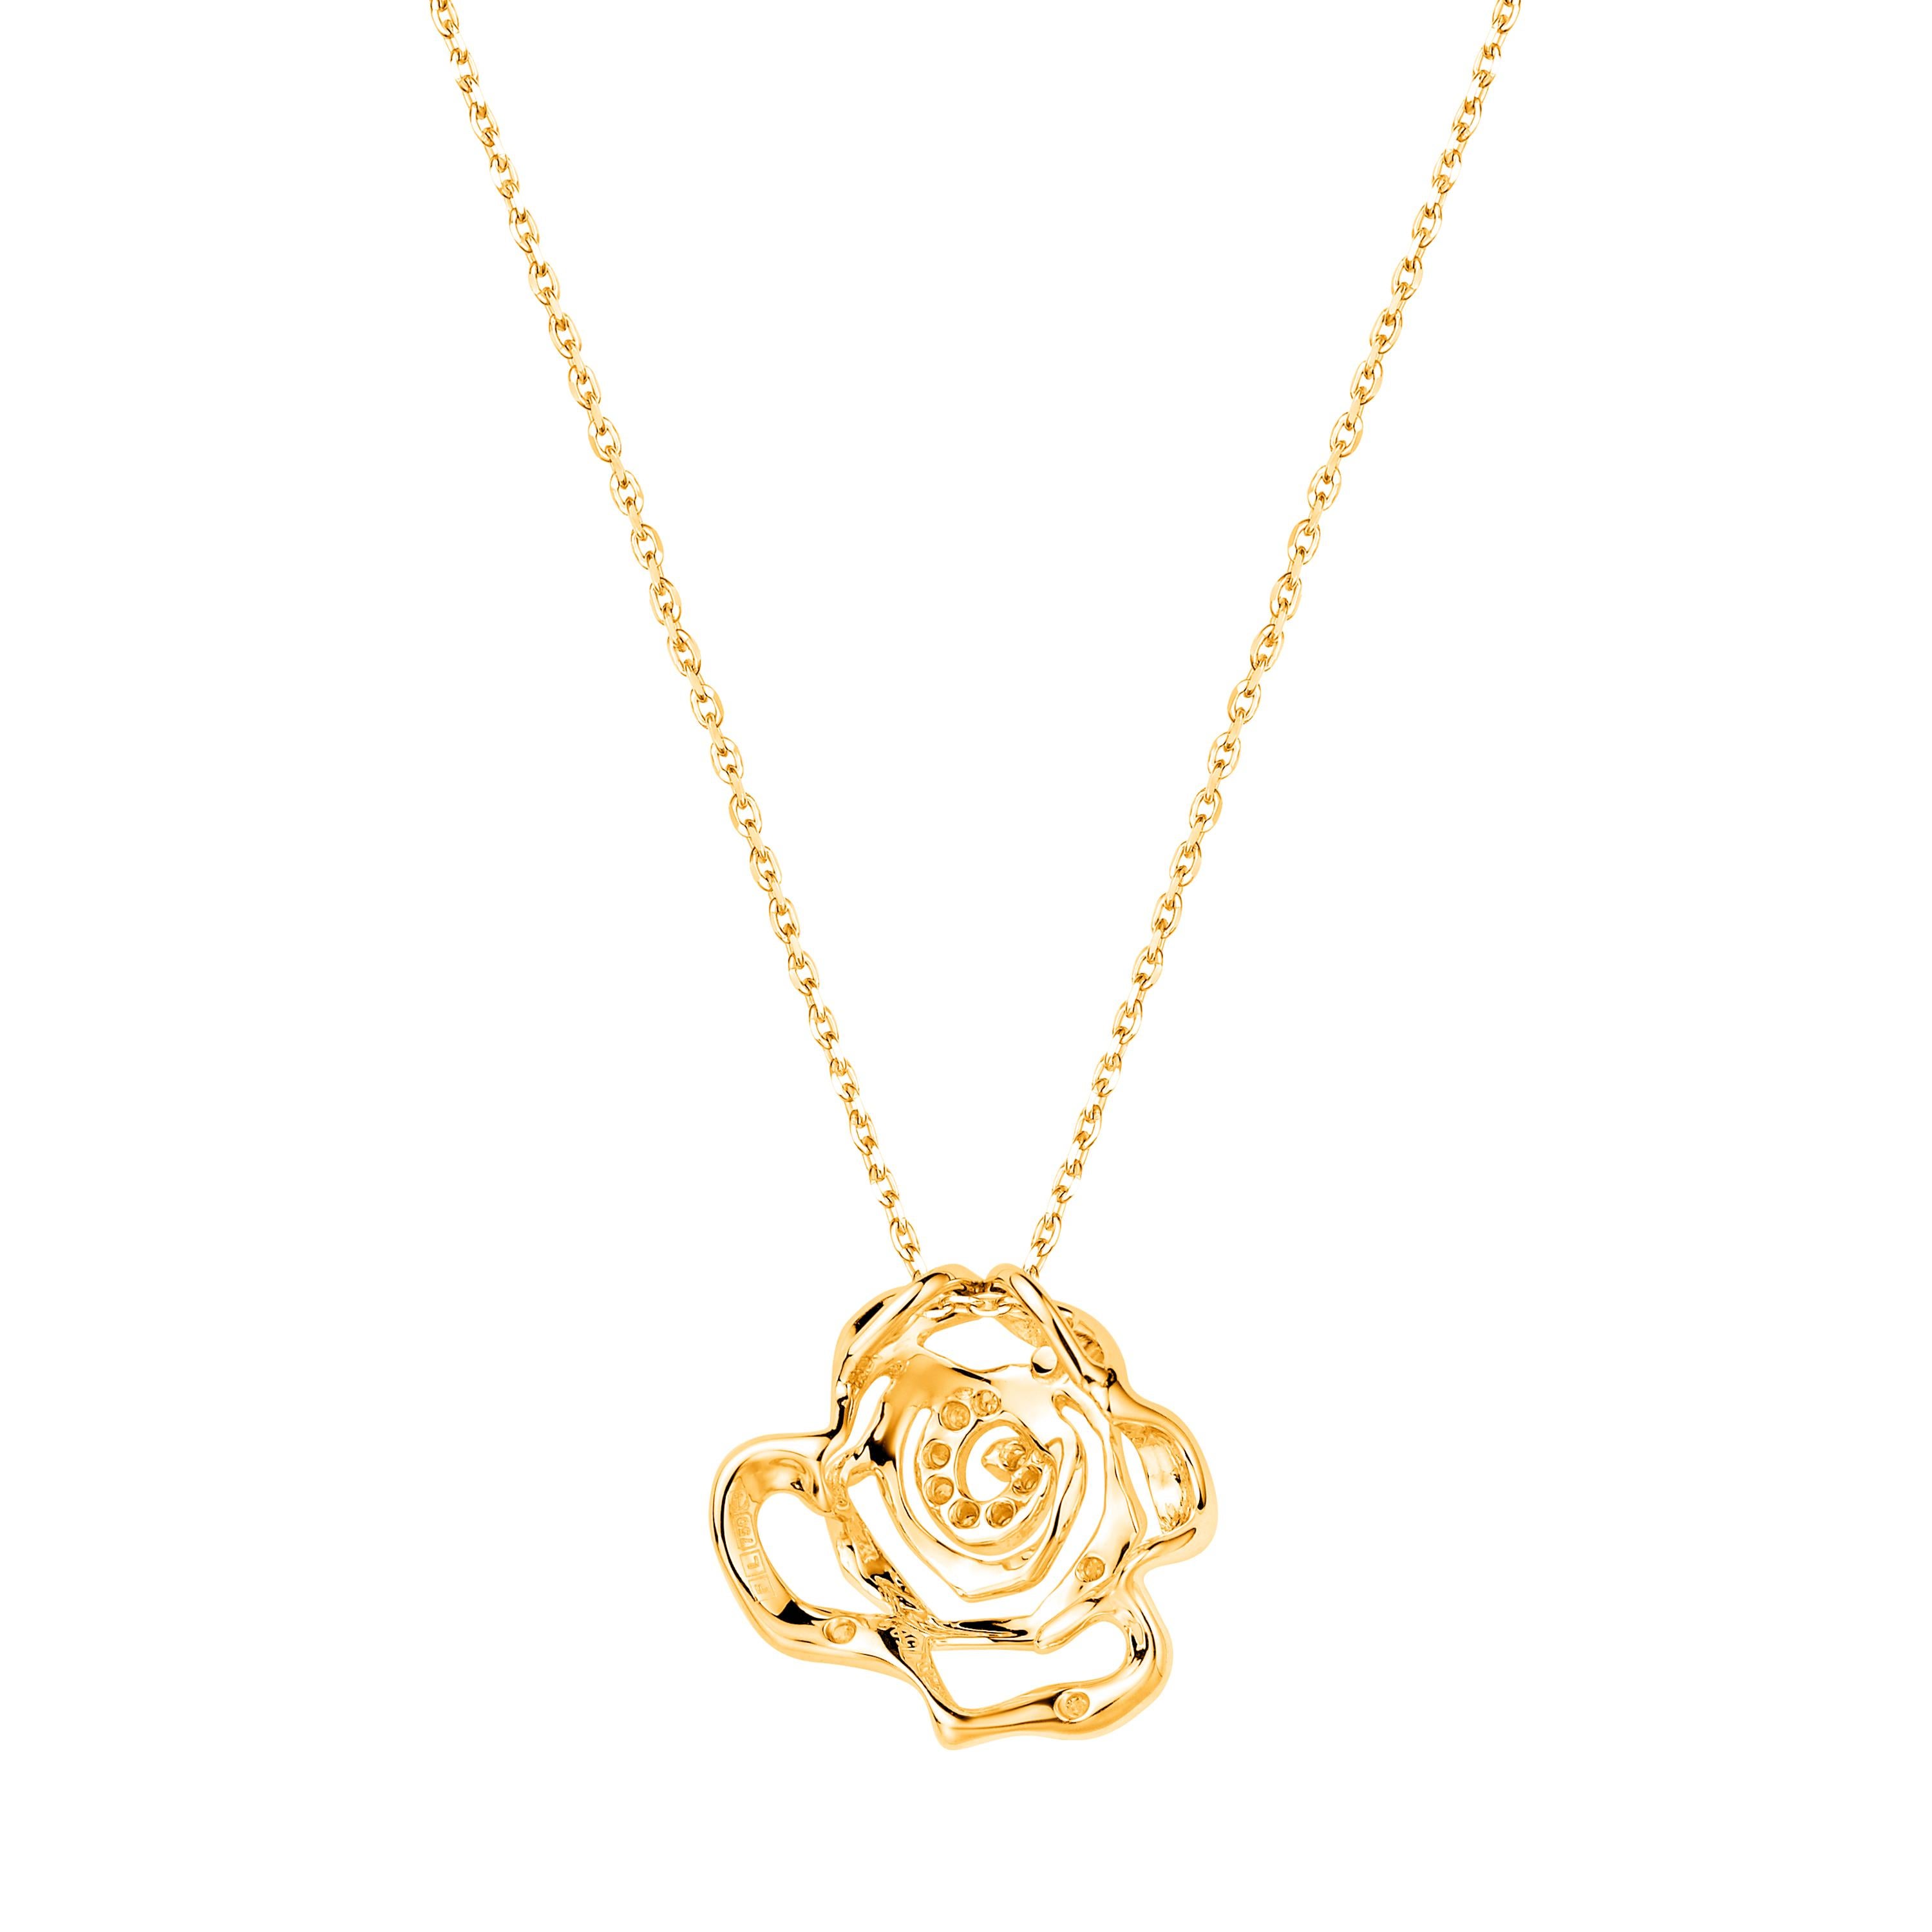 As enchanting as the real-life flower, the Rose collection offers a modern yet feminine look. This rose-inspired pendant features shimmering diamonds with a total weight of 0.012ct, set in 18ct yellow gold.

- Size (LxWxD): 12 x 12 x 4mm
- Weight: